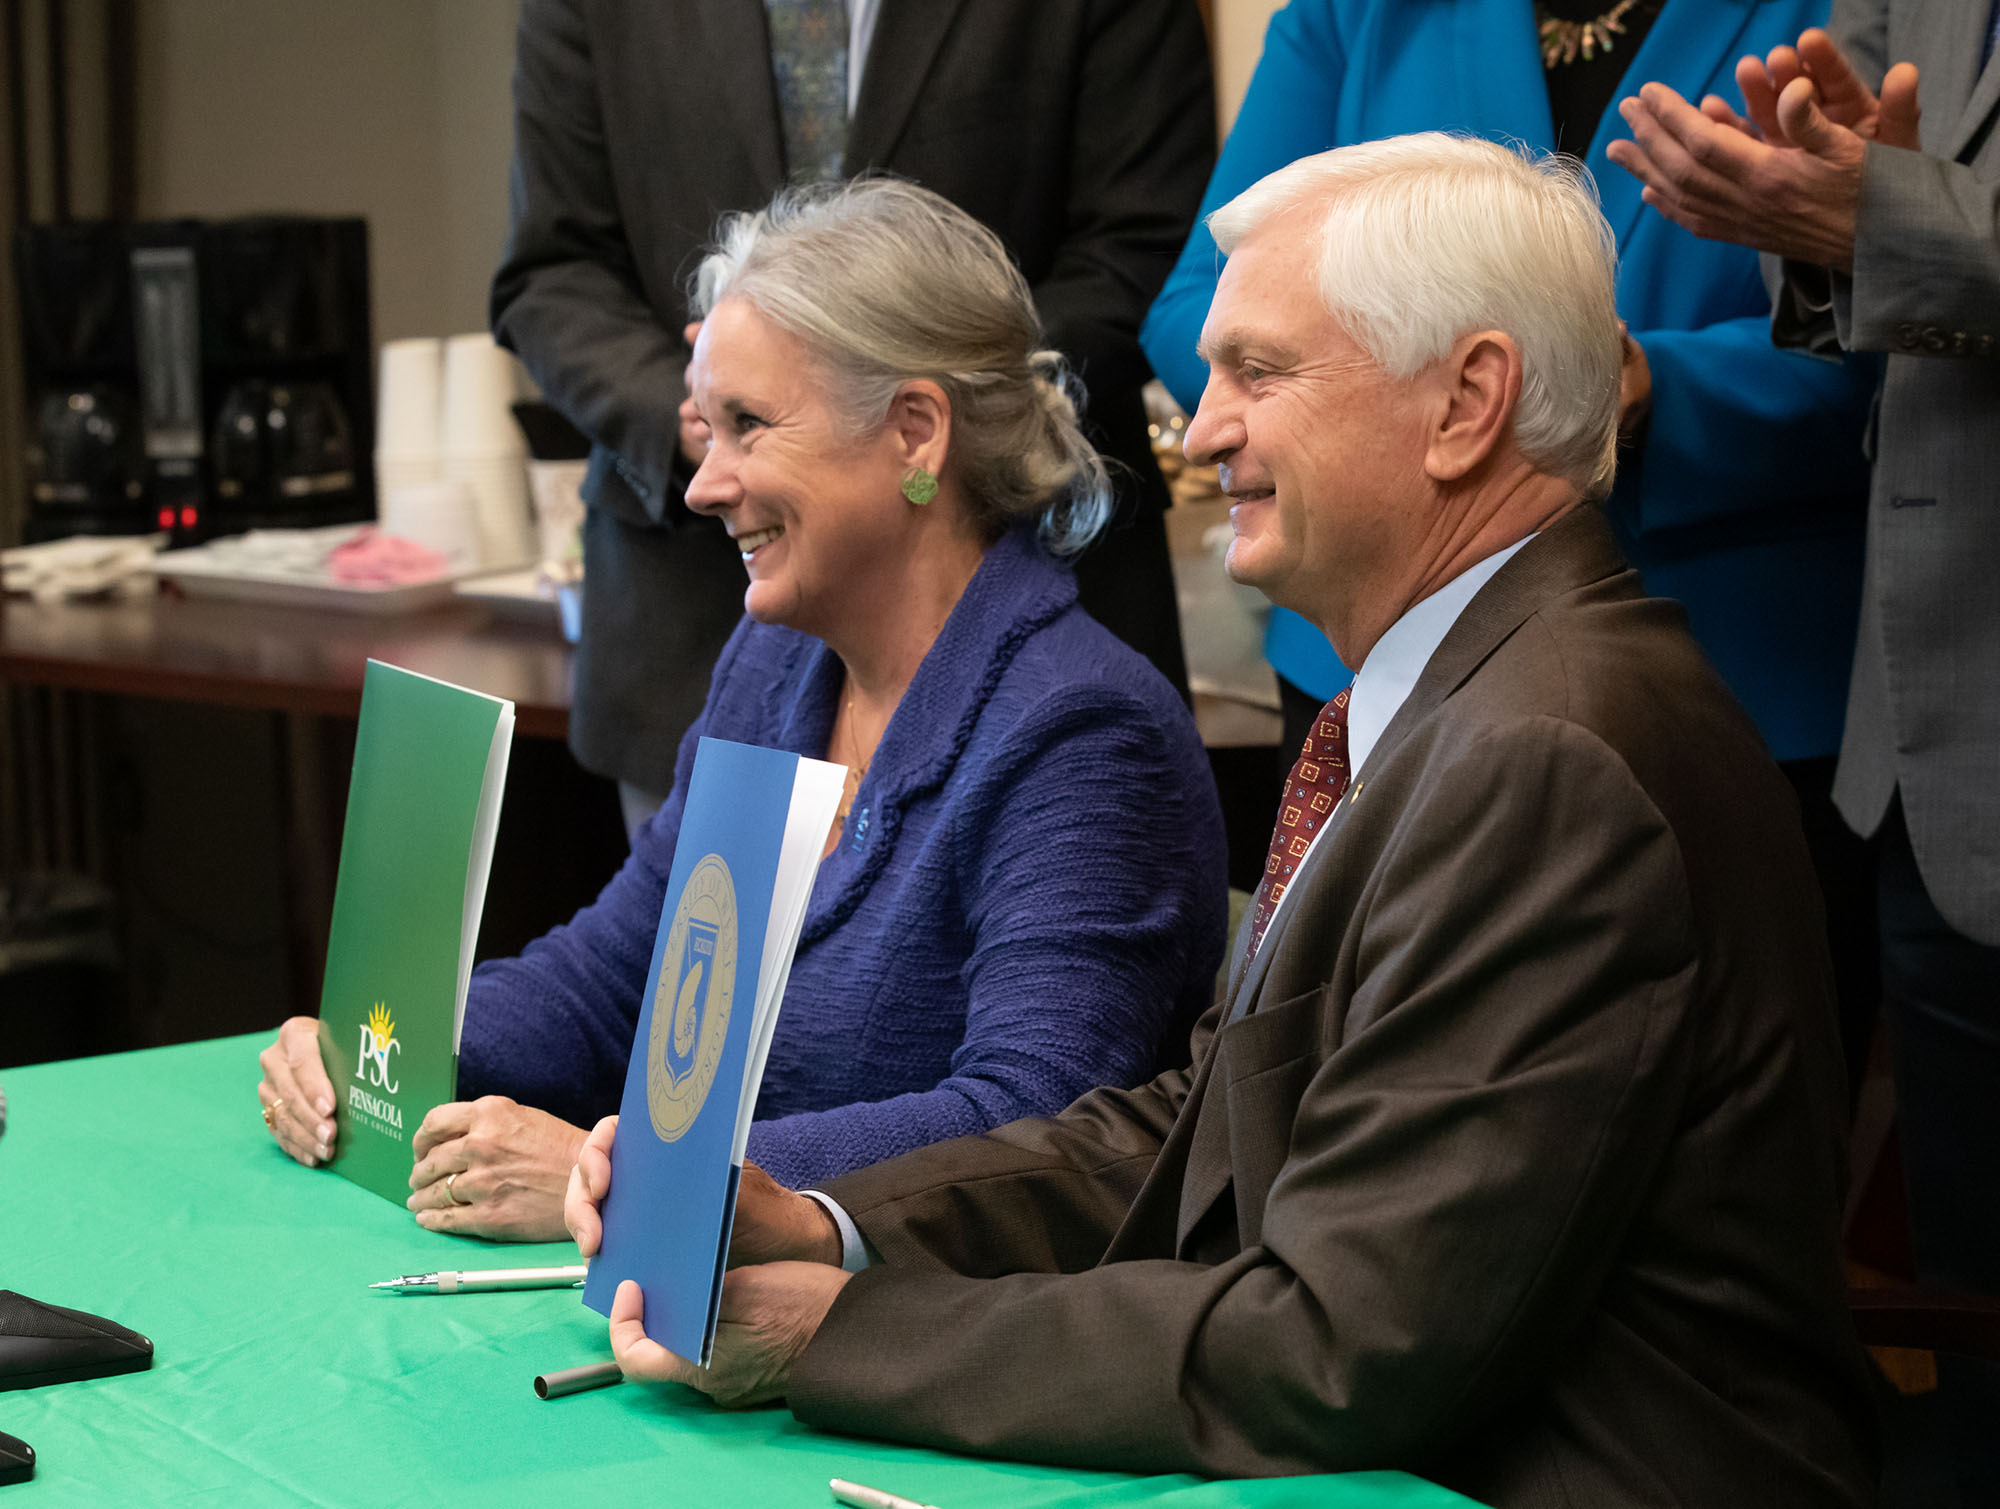 UWF President Martha D. Saunders and PSC President Ed Meadows at the PSC2UWF extended partnership signing ceremony on Tuesday, March 5, 2019